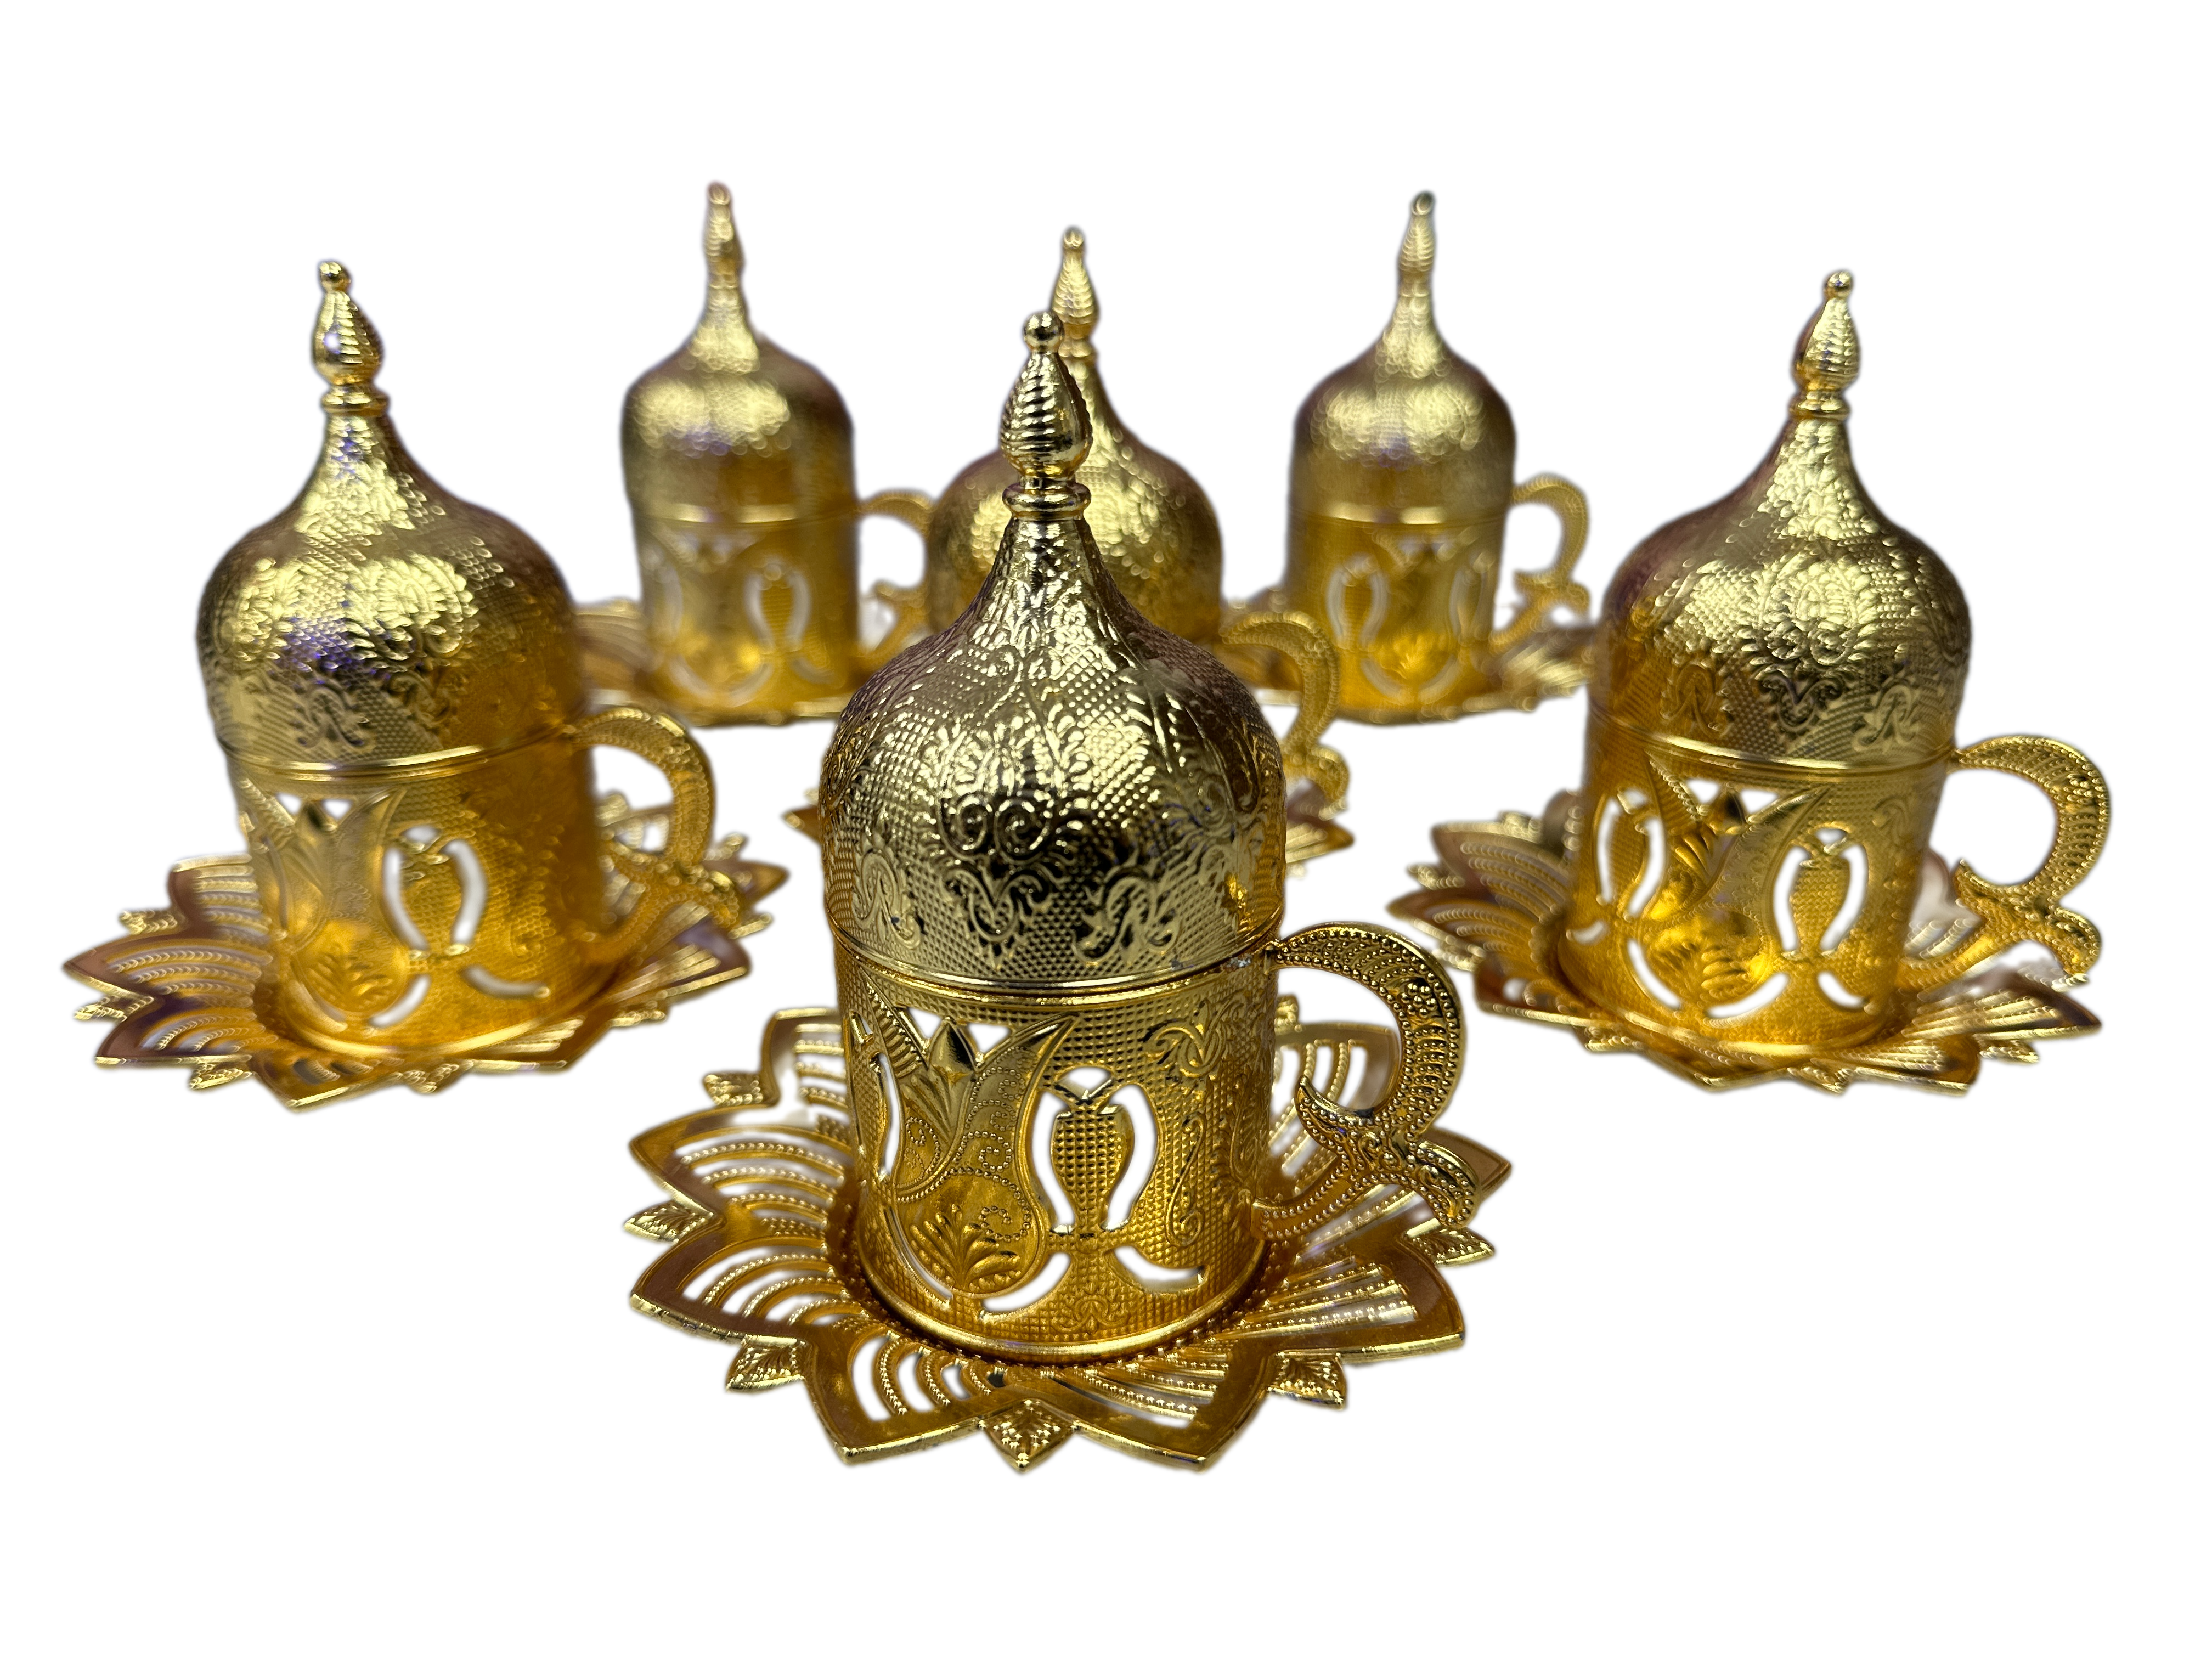 Turkish style coffee sets of 6 for occasions